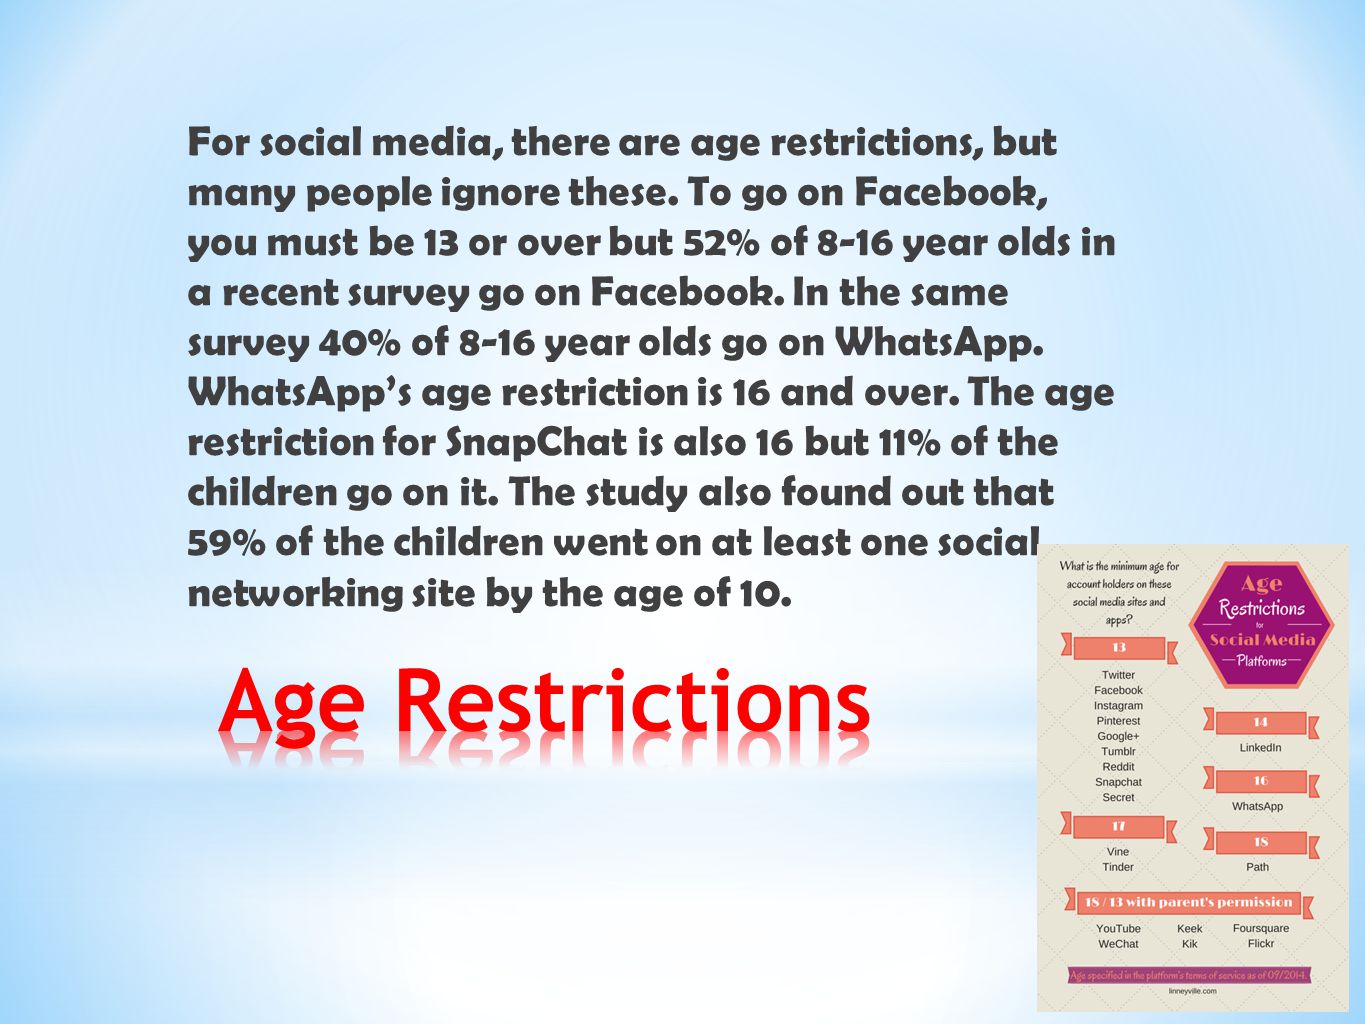 For social media, there are age restrictions, but many people ignore these. To go on Facebook, you must be 13 or over but 52% of 8-16 year olds in a recent survey go on Facebook. In the same survey 40% of 8-16 year olds go on WhatsApp. WhatsApp’s age restriction is 16 and over. The age restriction for SnapChat is also 16 but 11% of the children go on it. The study also found out that 59% of the children went on at least one social networking site by the age of 10.